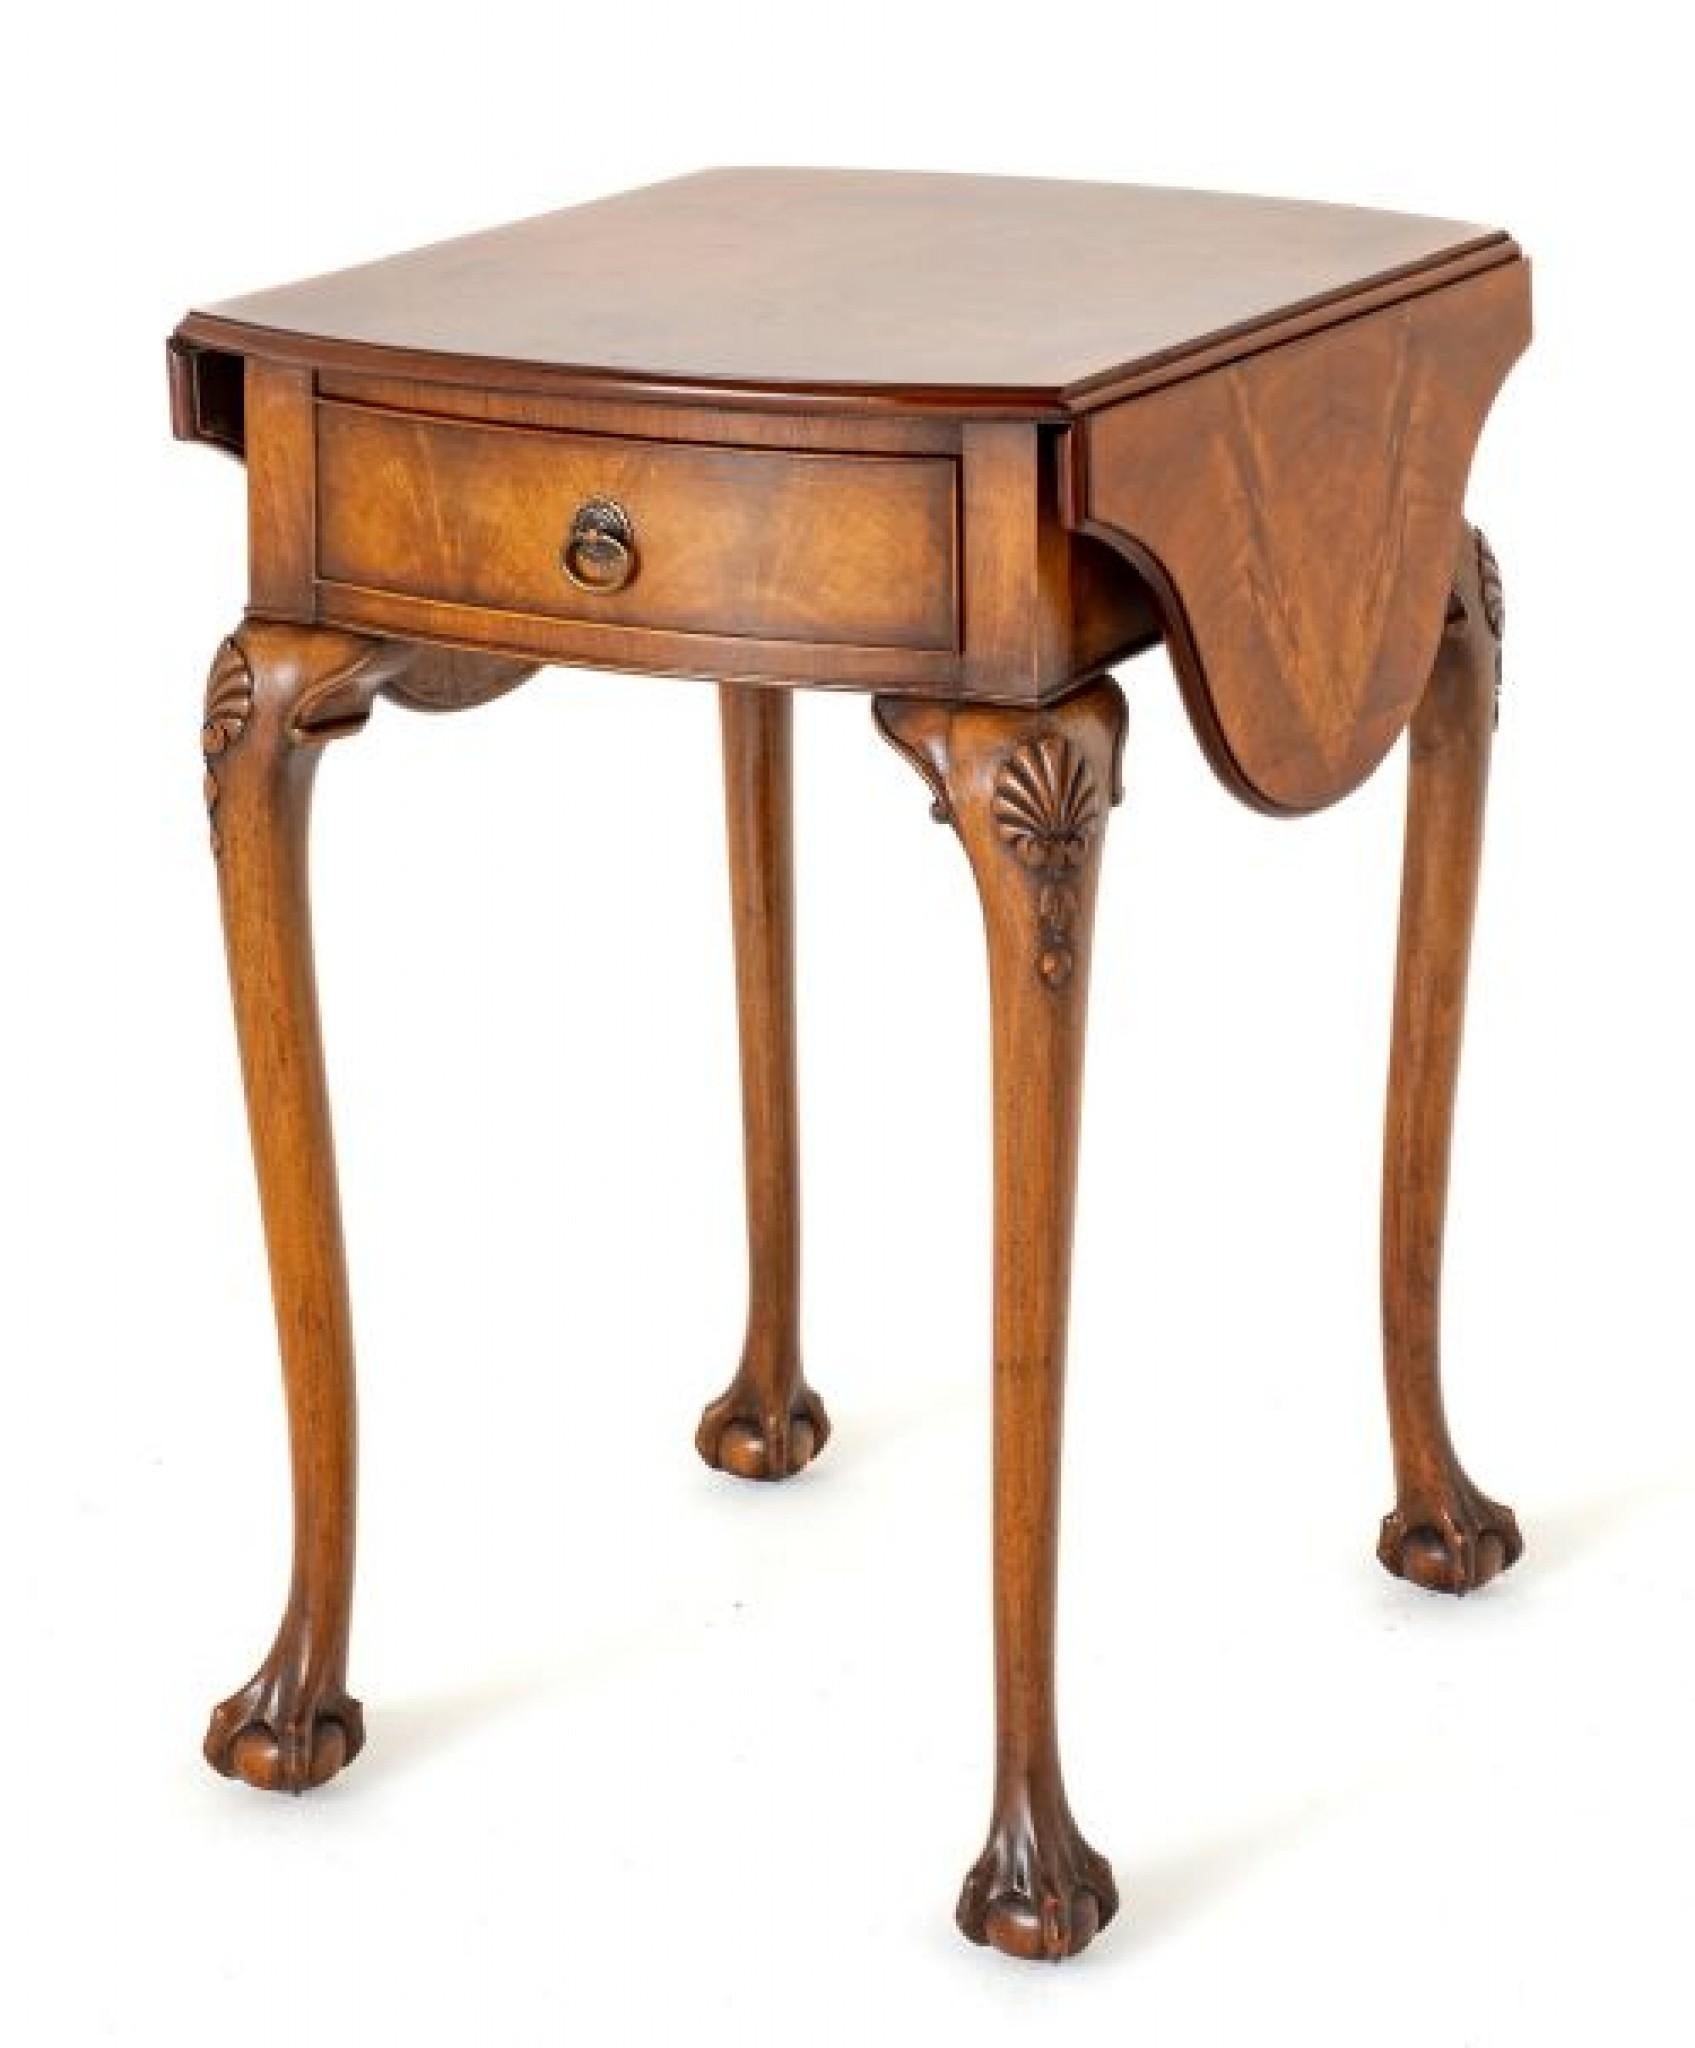 Queen Anne Style Walnut Occasional Table.
This Pretty Table is raised Upon Cabriole Legs with Carved Ball and Claw Feet and Carved Shells to the Knees.
The Table Features 1 x Mahogany Lined Drawer.
Circa 1920
Having Quality Figured Burr Walnut